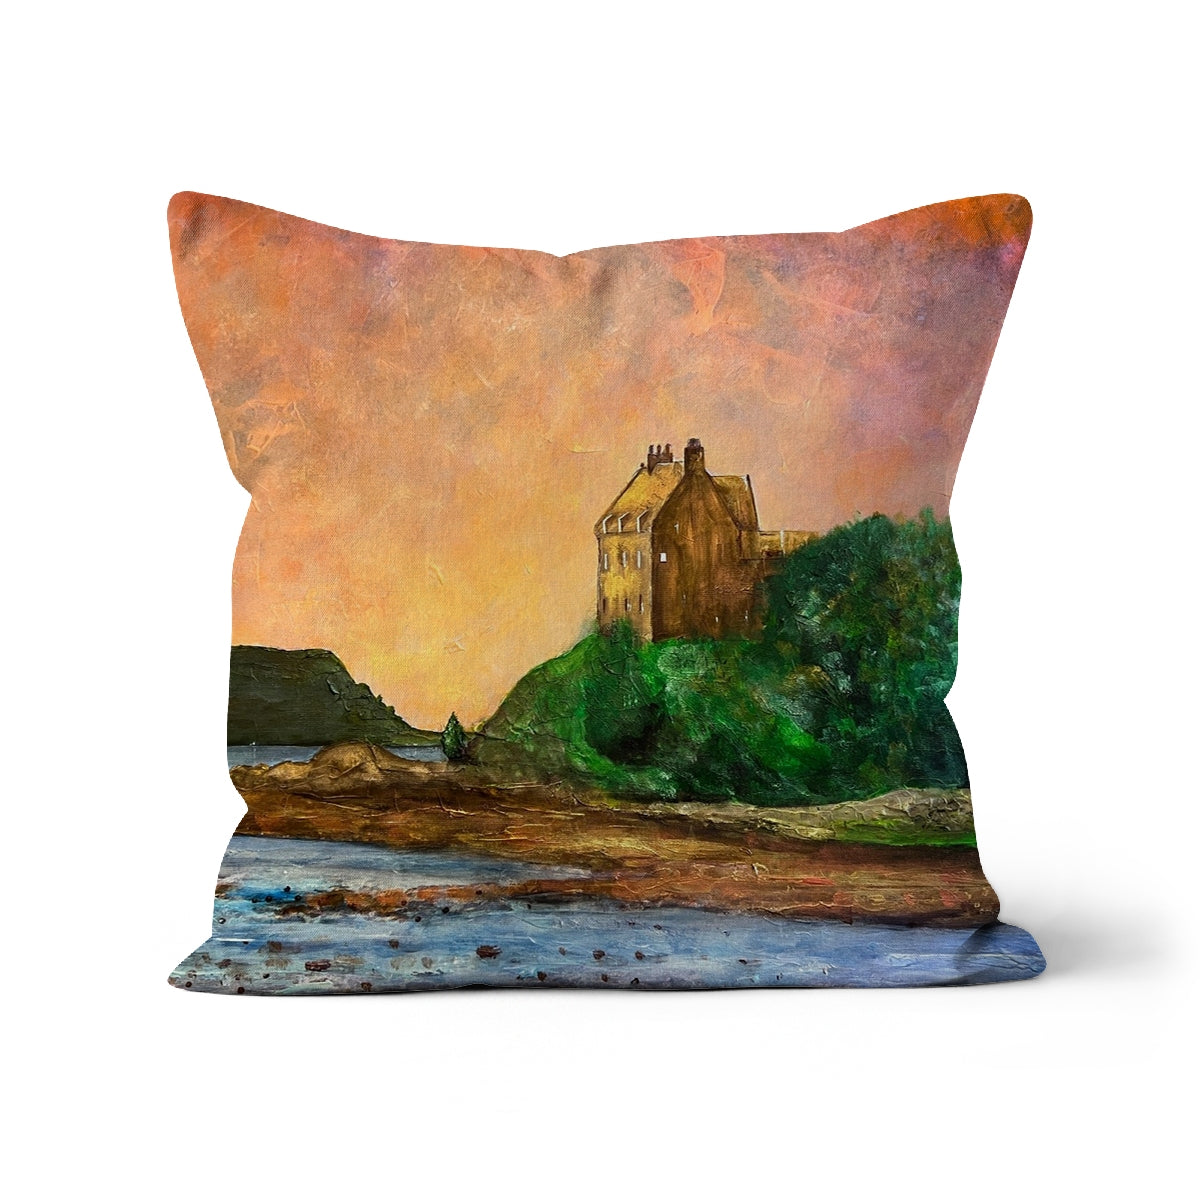 Duntrune Castle Art Gifts Cushion-Cushions-Historic & Iconic Scotland Art Gallery-Faux Suede-16"x16"-Paintings, Prints, Homeware, Art Gifts From Scotland By Scottish Artist Kevin Hunter